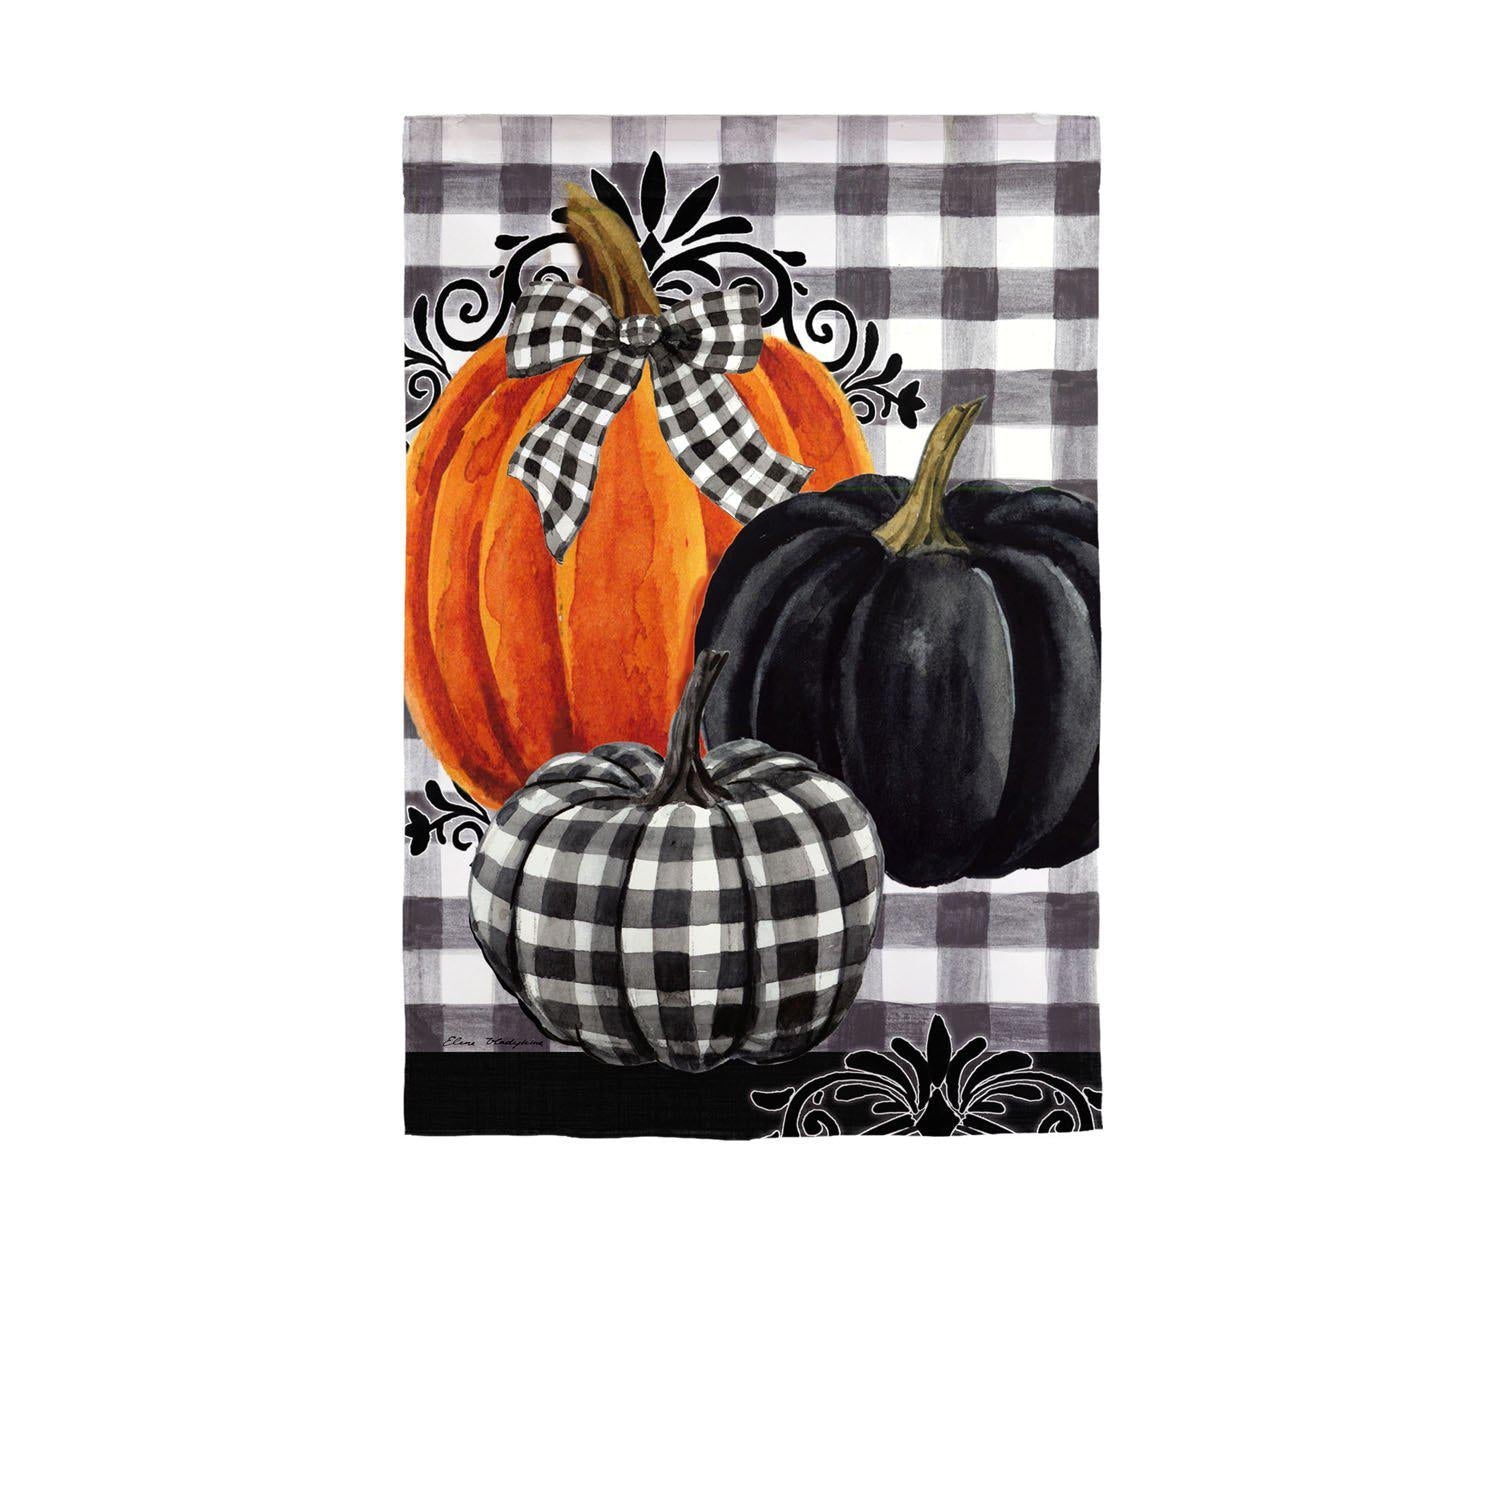 The Pumpkin Check house banner features three pumpkins in black, orange, and checked colors on a black and white checkered background. 